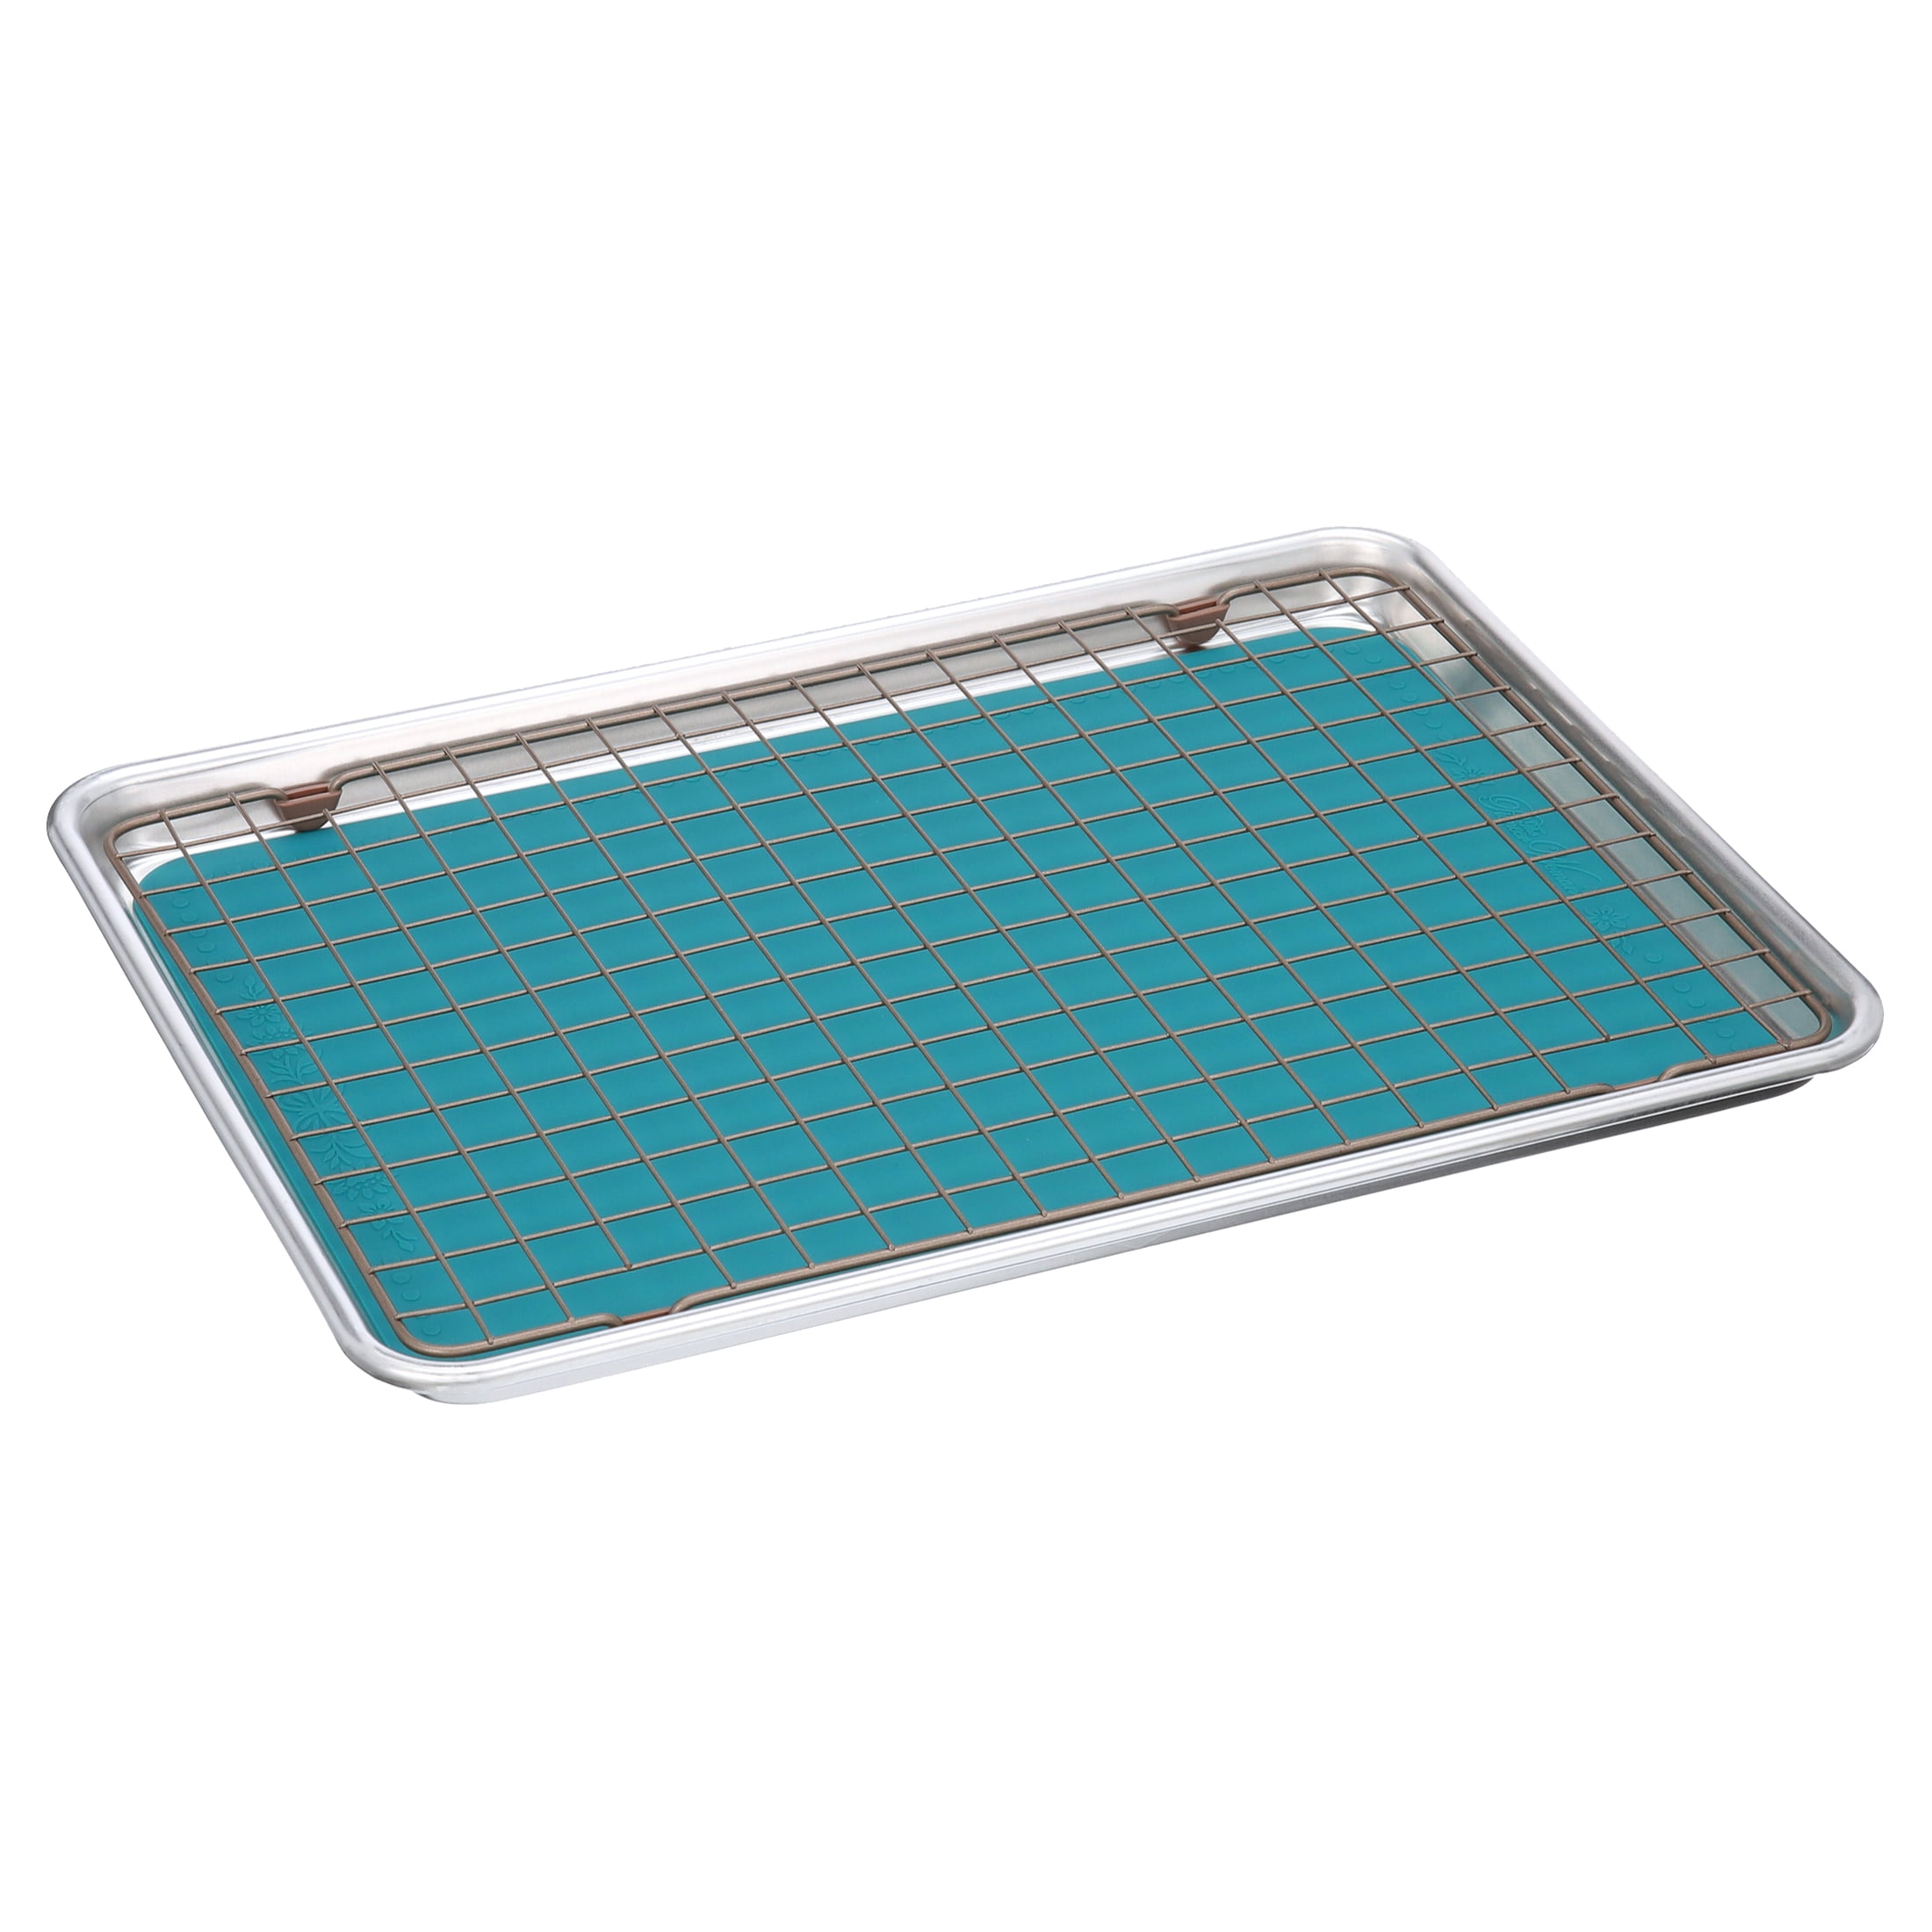 PIONEER WOMAN ~DAISY DITSY~ NONSTICK SILICONE BAKING MAT COOKIE